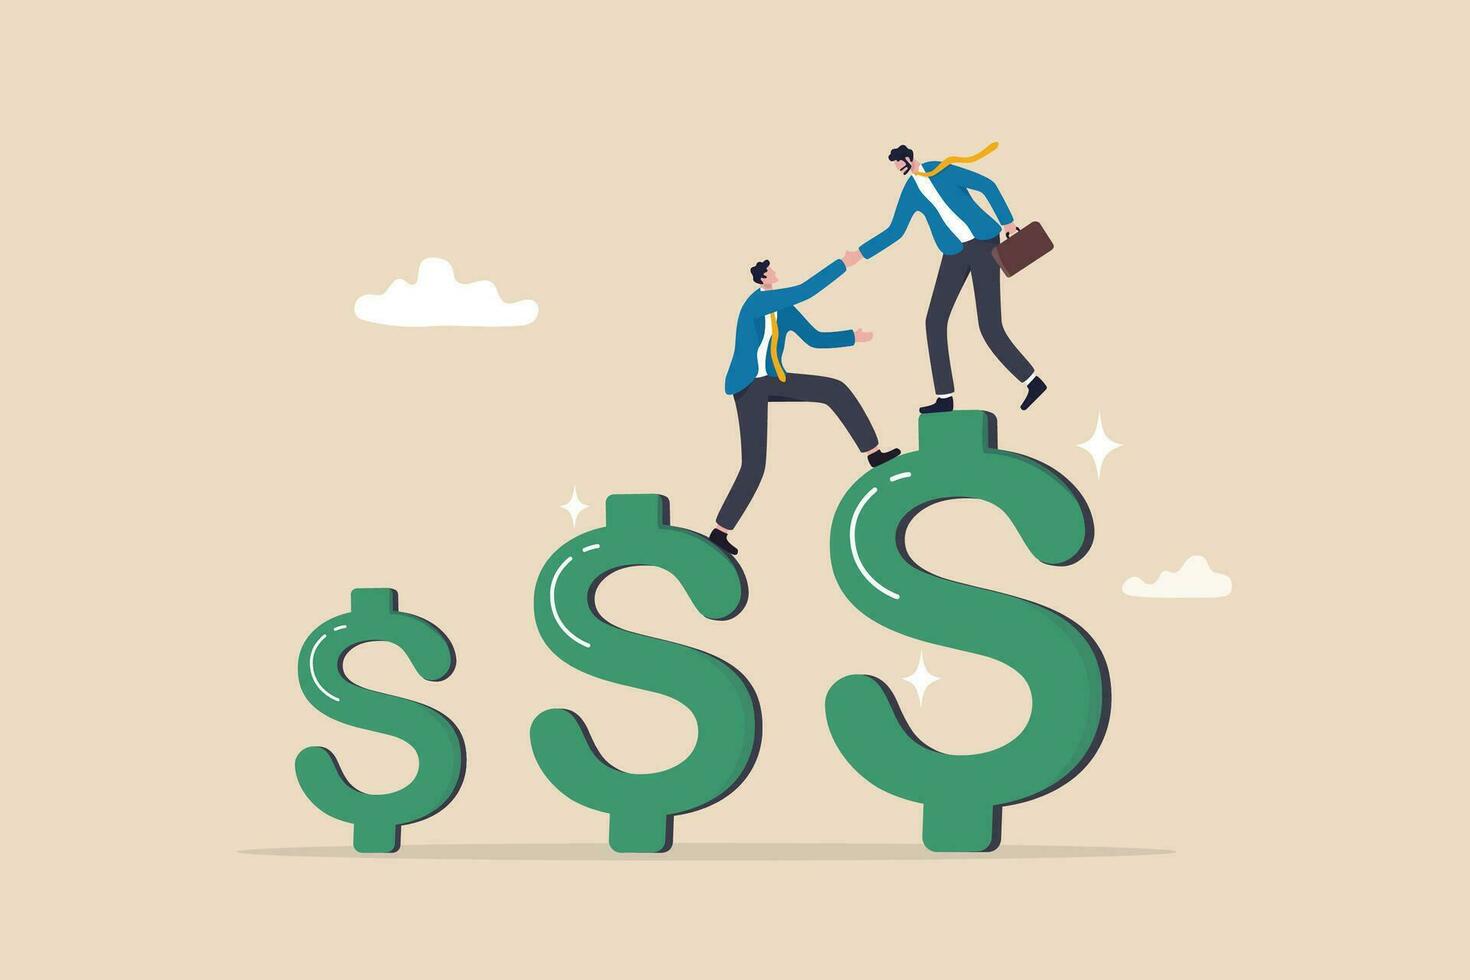 Increase profit, financial advisor help increase earning, income or revenue, growing wealth, profit growth or funding support, improvement or challenge concept, businessman help climb up dollar sign. vector